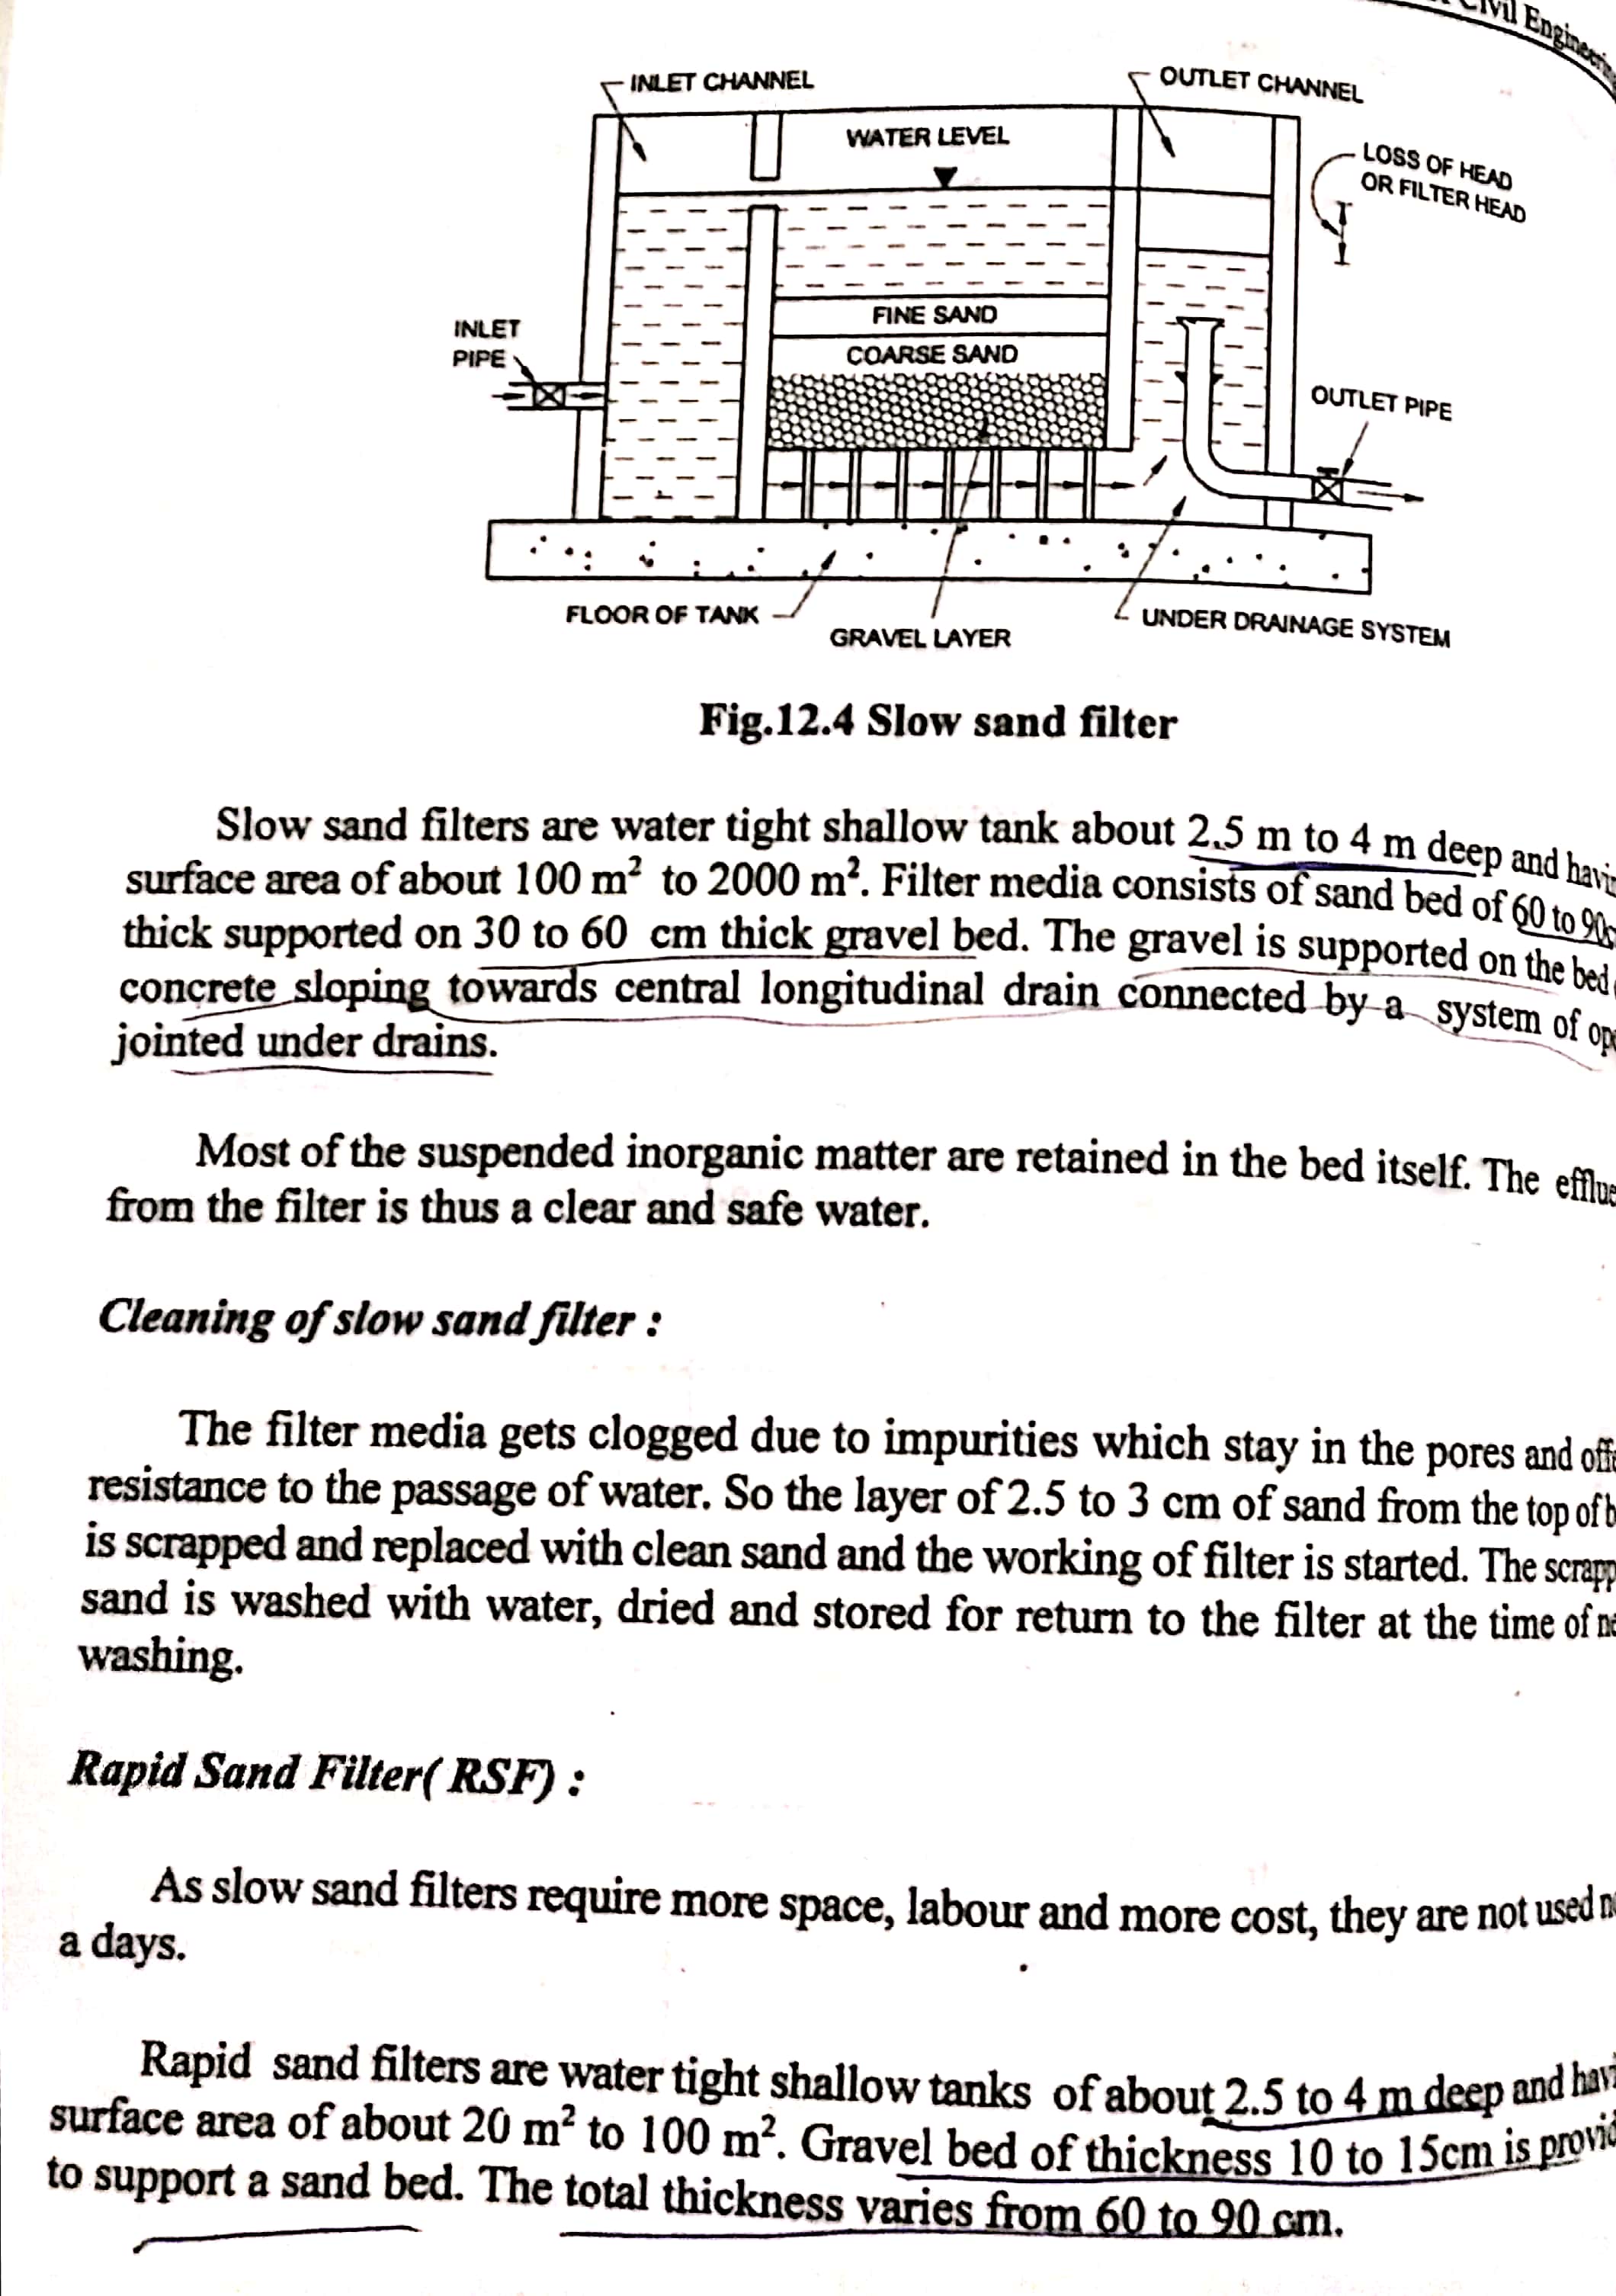 Cleaning of slow sand filter and Rapid Sand filter -New Doc 2019-11-30 20.41.41_83.jpg